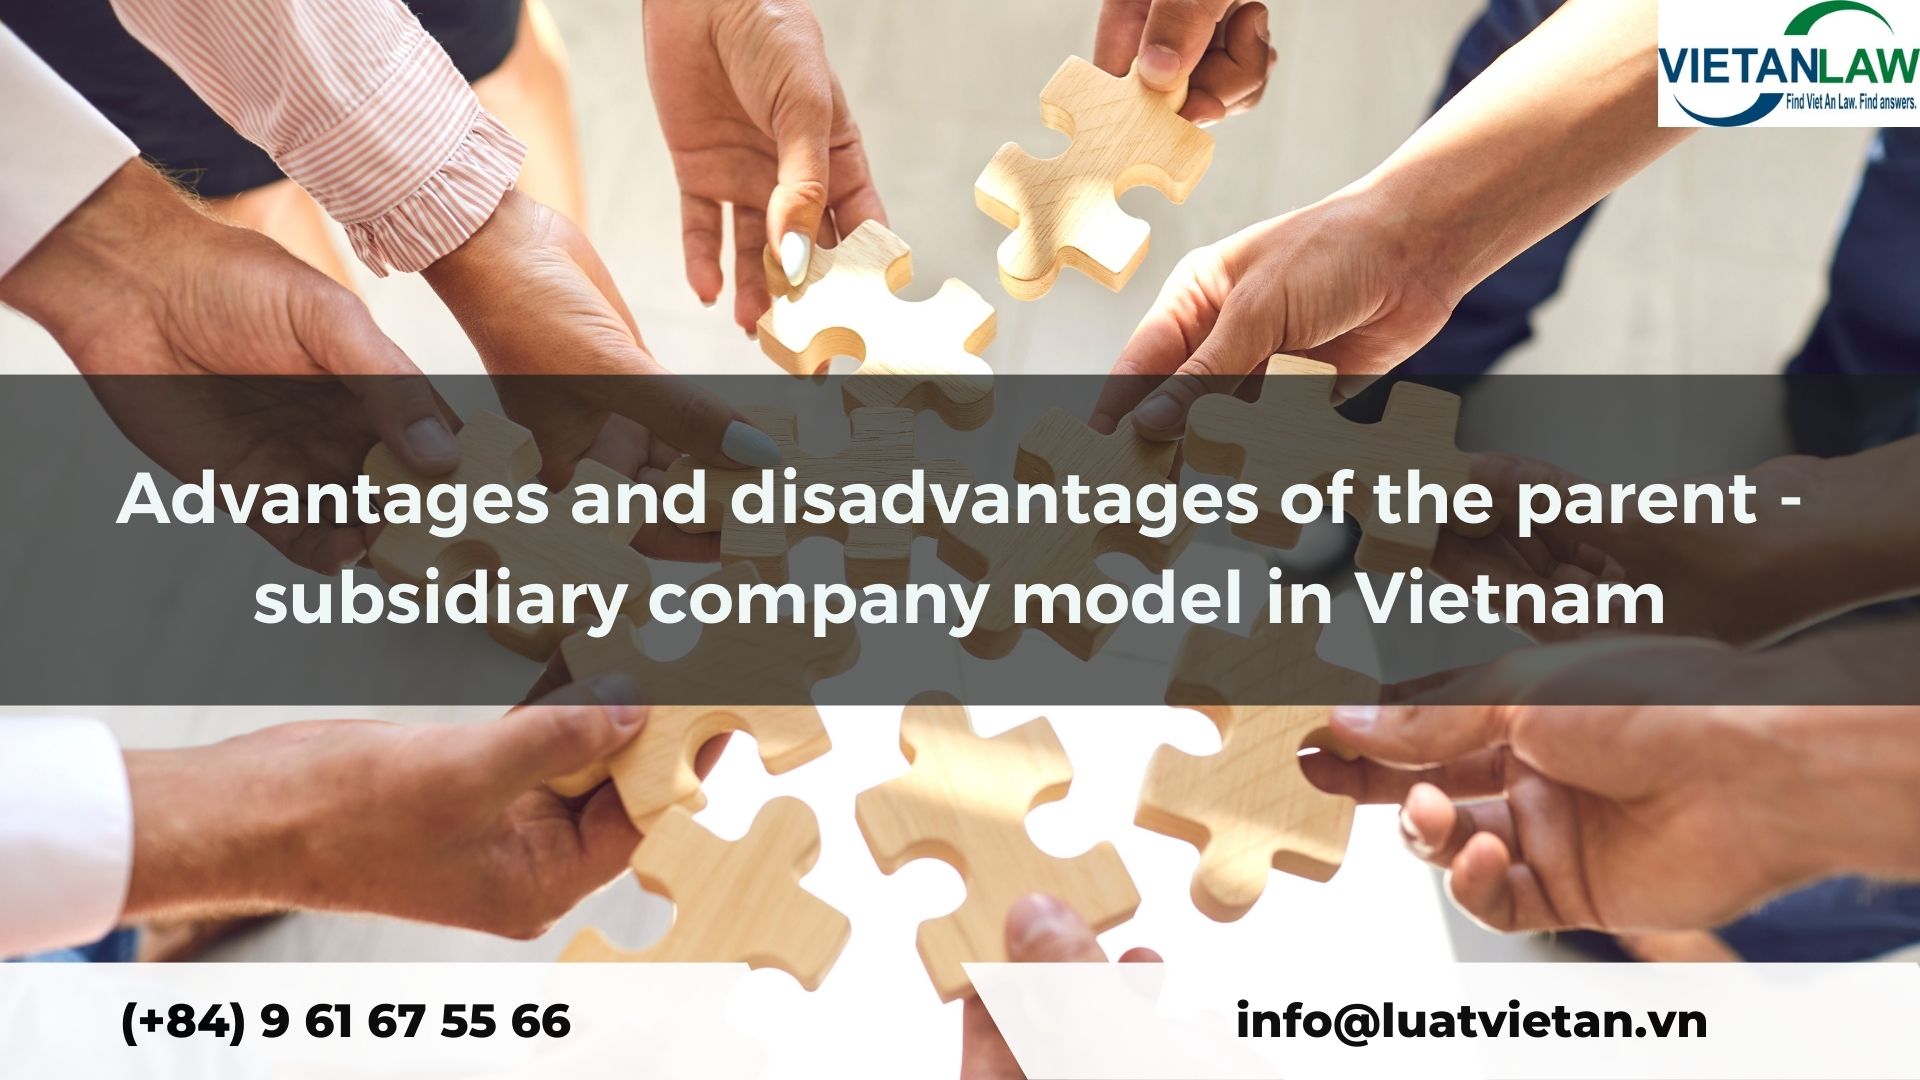 Advantages and disadvantages of the parent - subsidiary company model in Vietnam